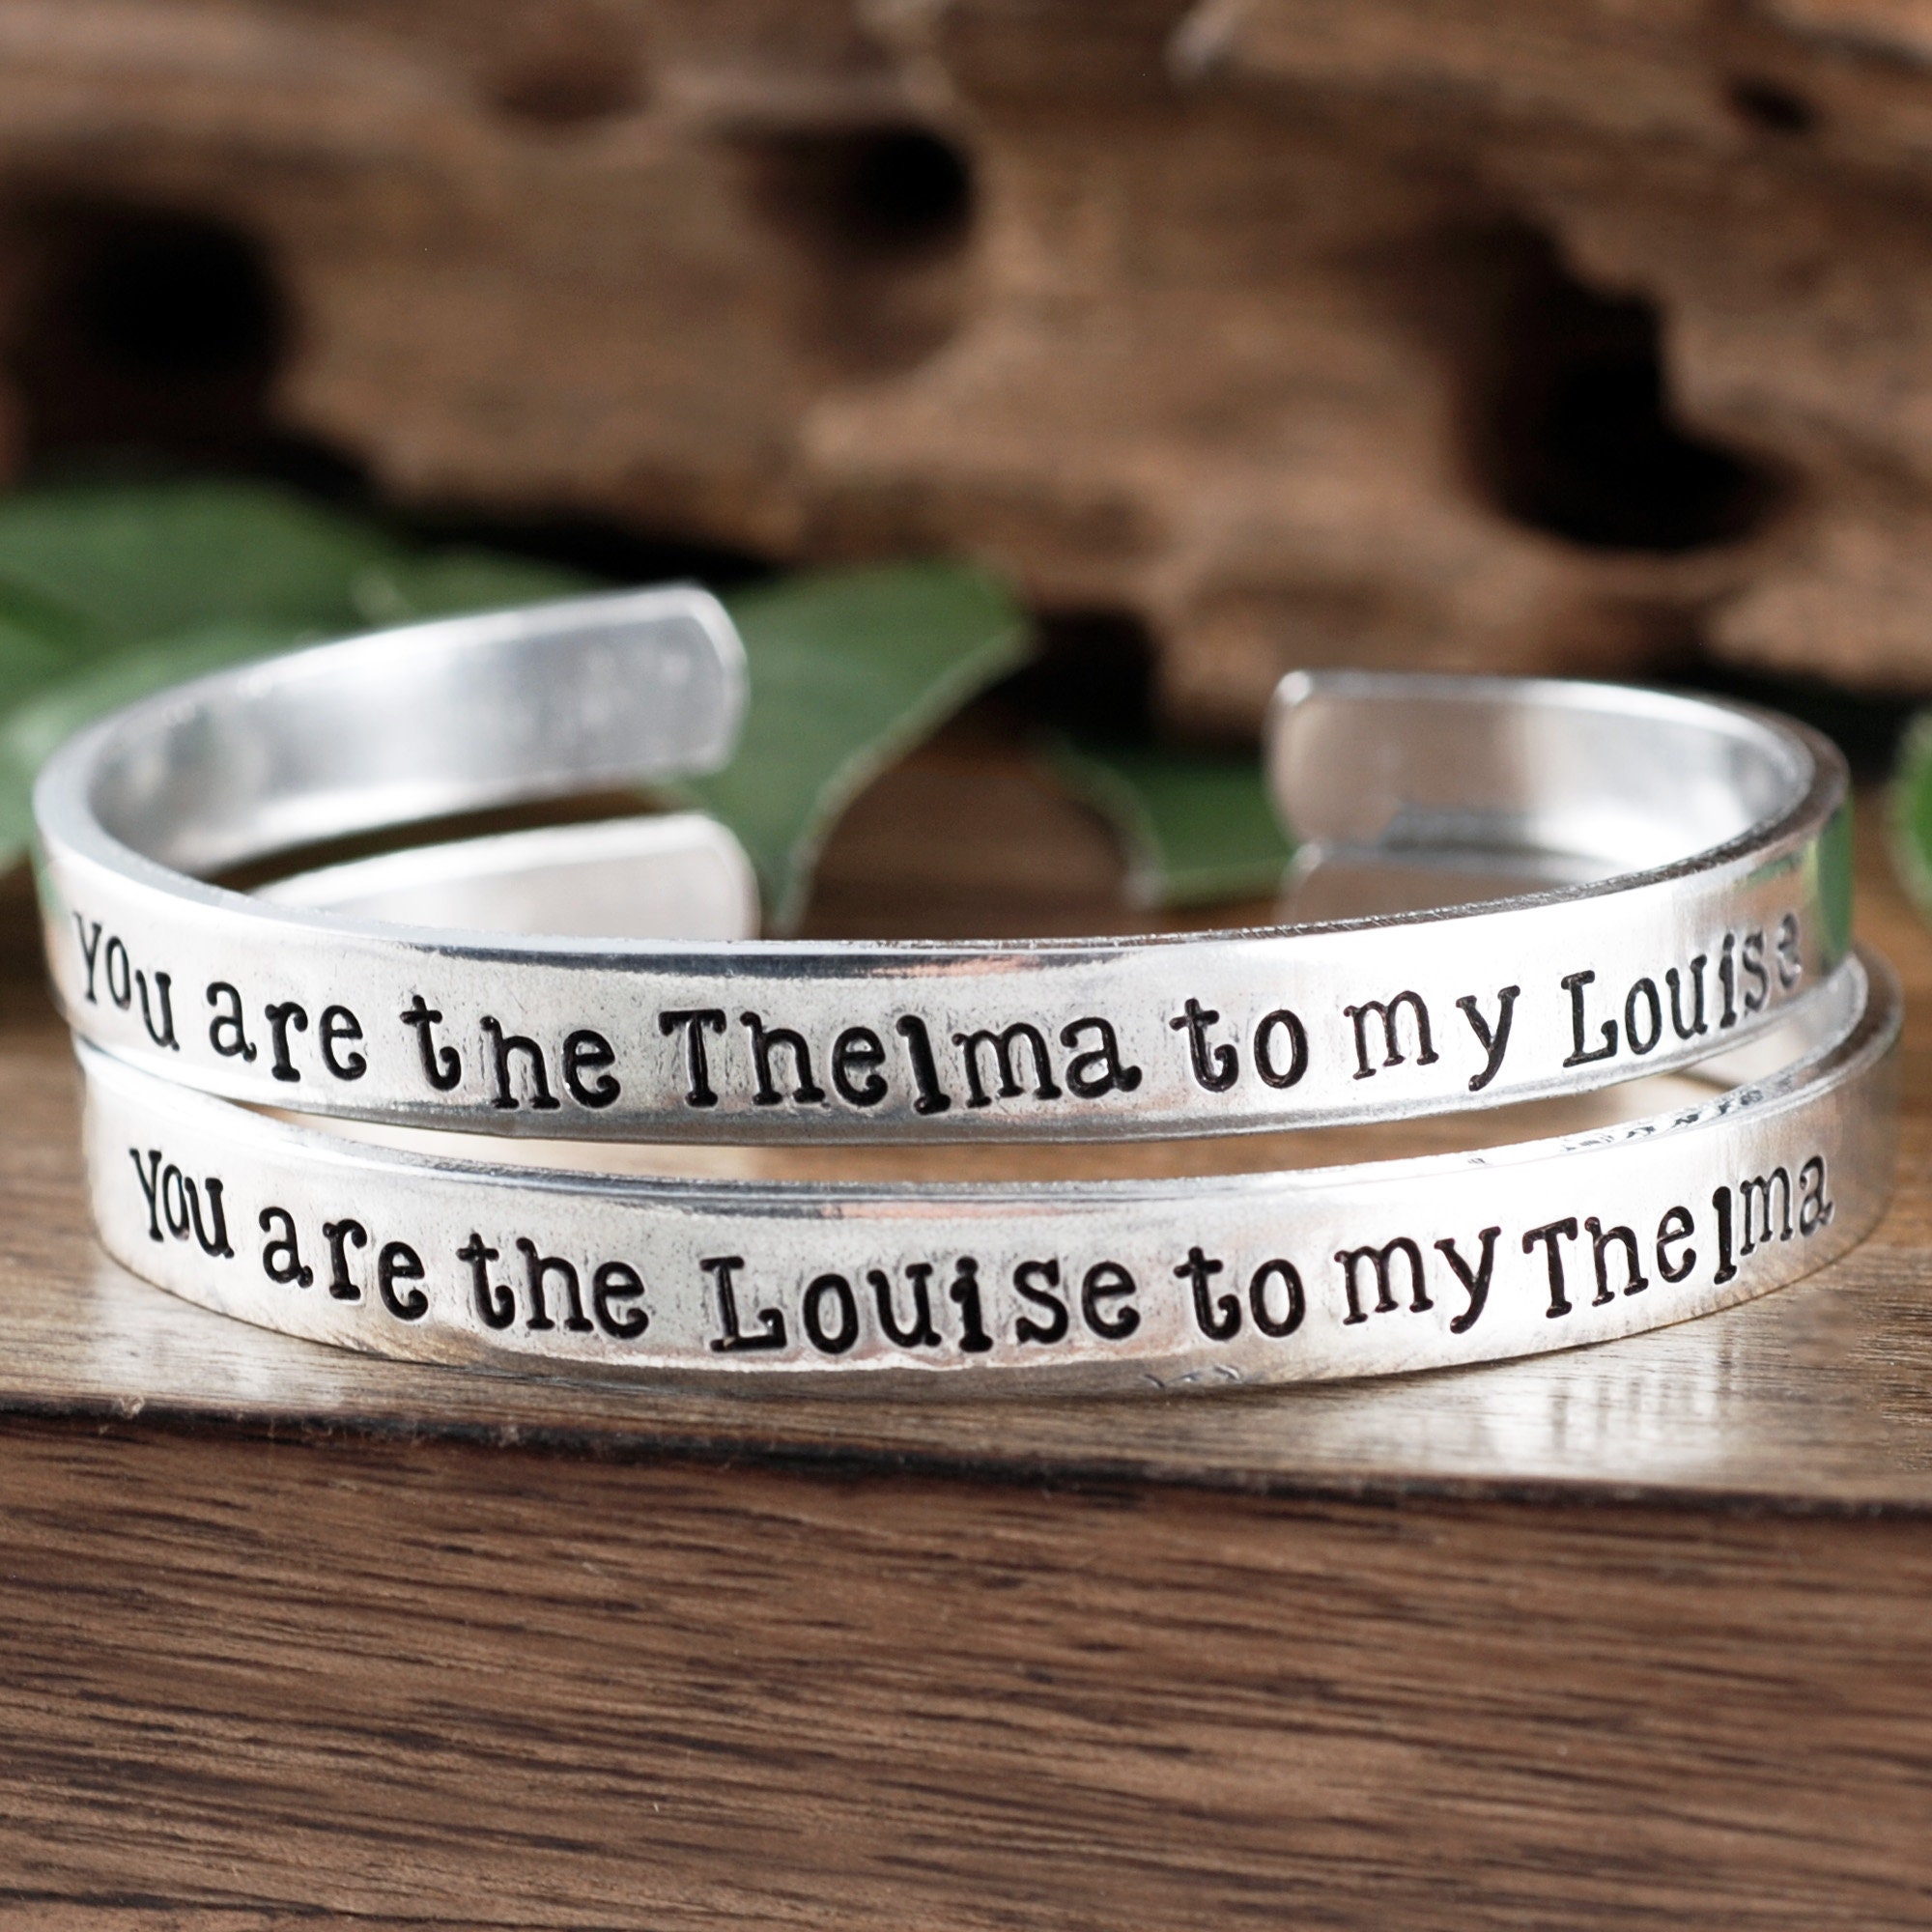 bobauna Bracelet You're The Louise/Thelma to My Thelma/Louise Friendship  Jewelry Moving Away Gift For BFF Sister